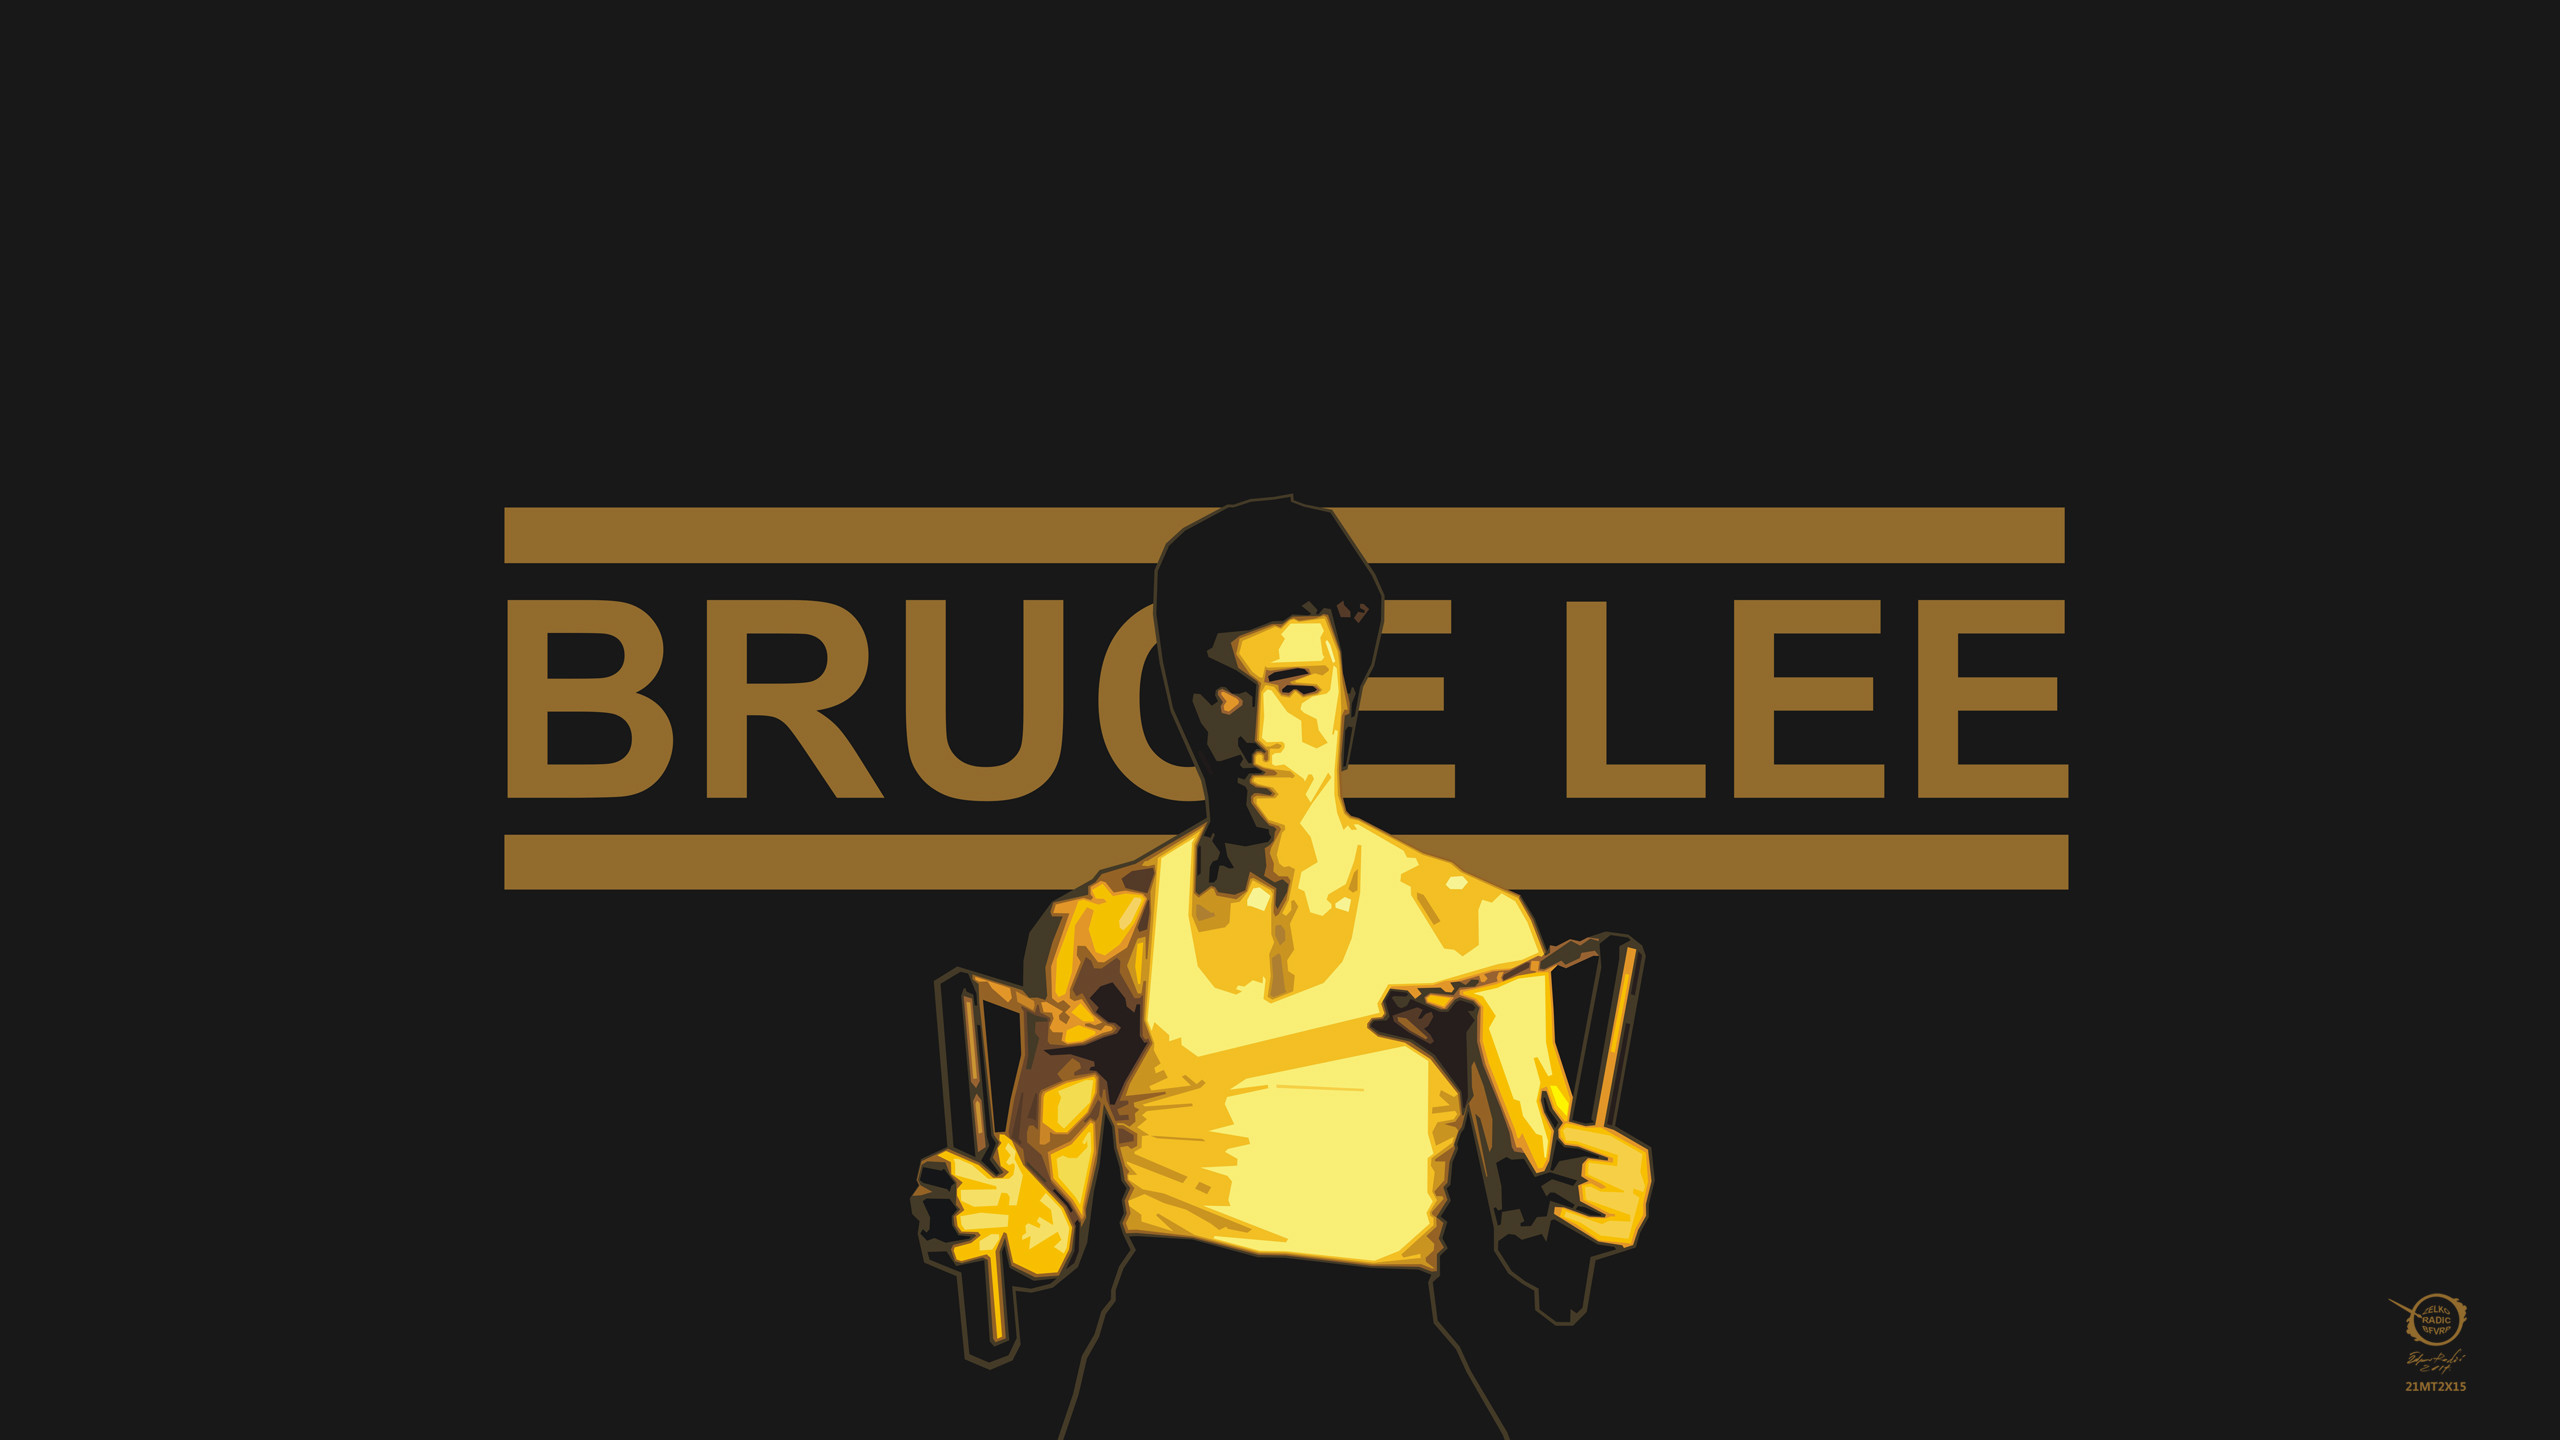 2560x1440 Bruce Lee wallpapers and stock photos